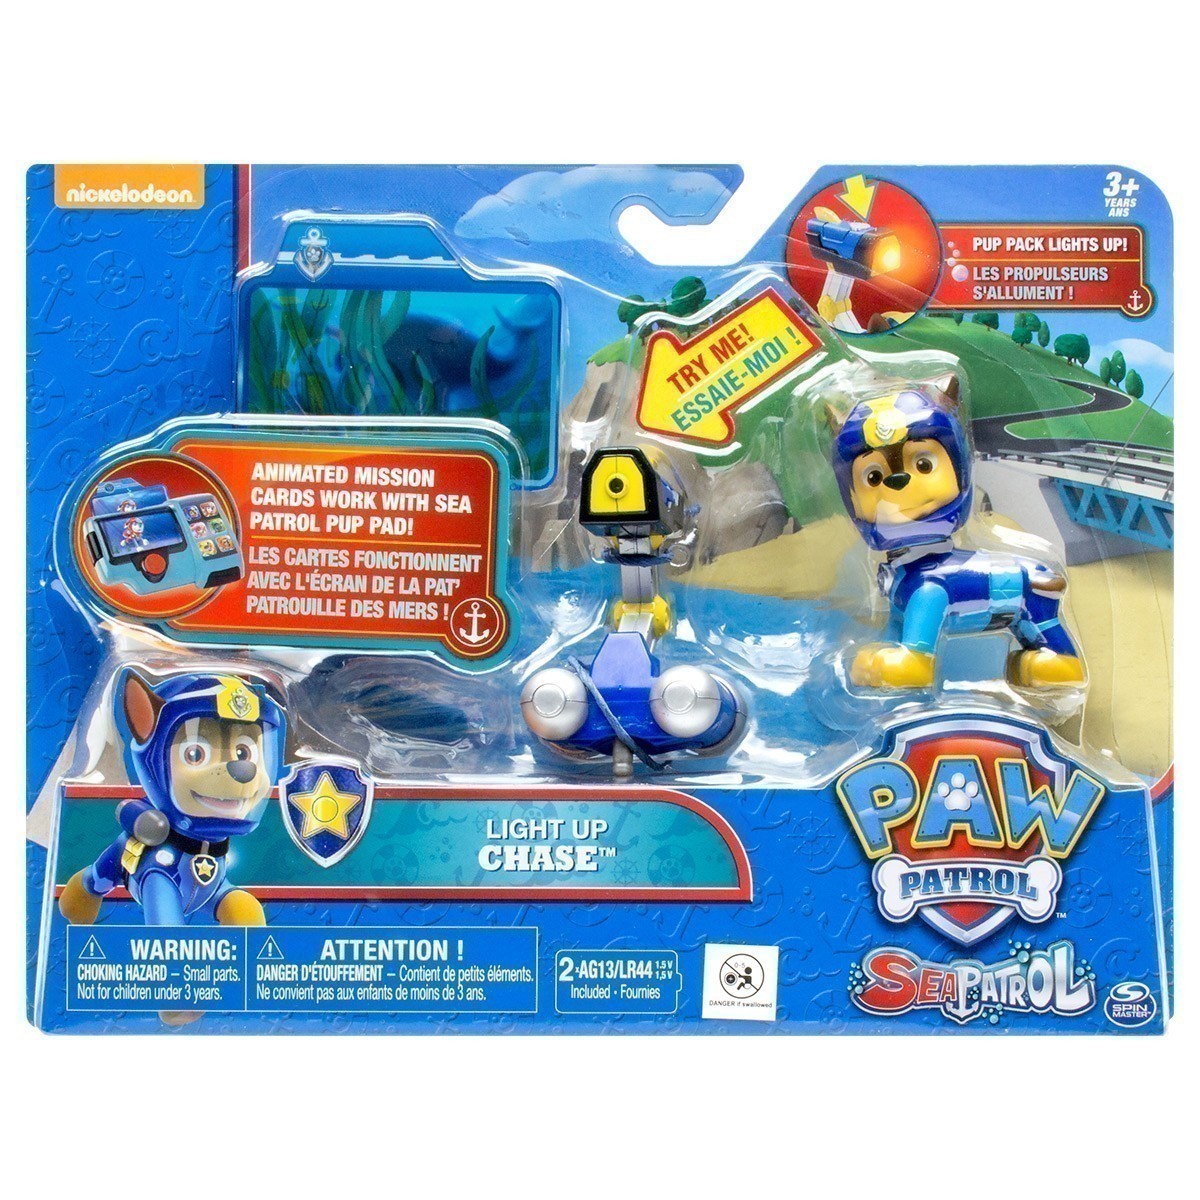 Paw Patrol - Sea Patrol Deluxe Figure - Light Up Chase